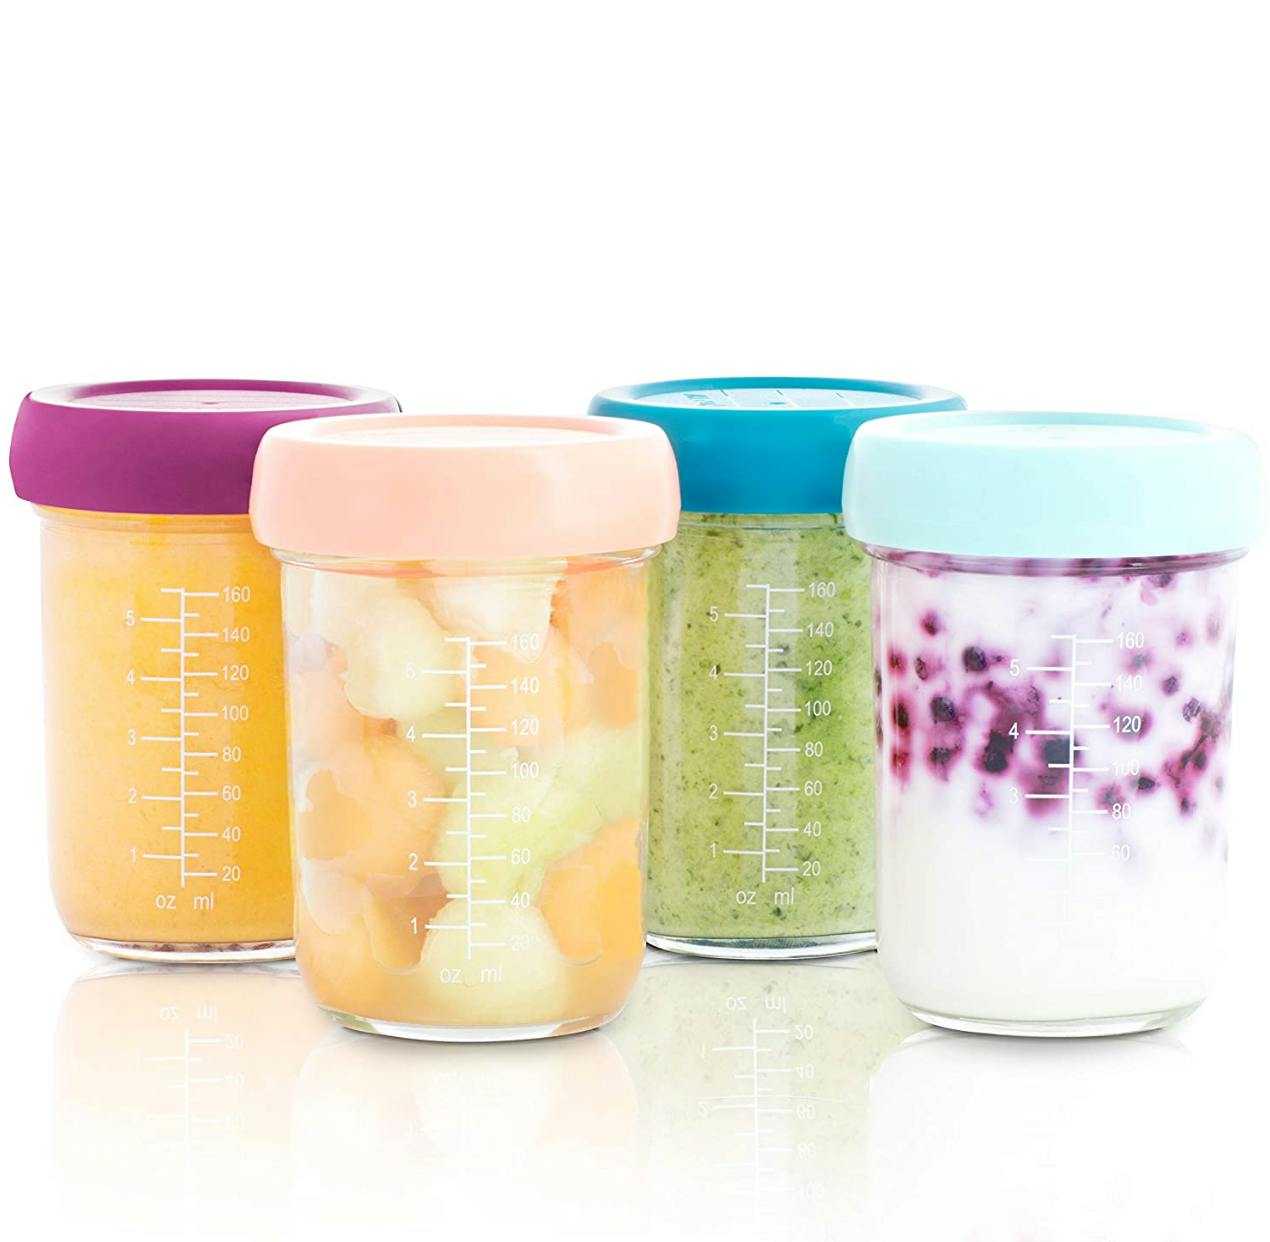 Babymoov Babybowls Glass Storage Containers